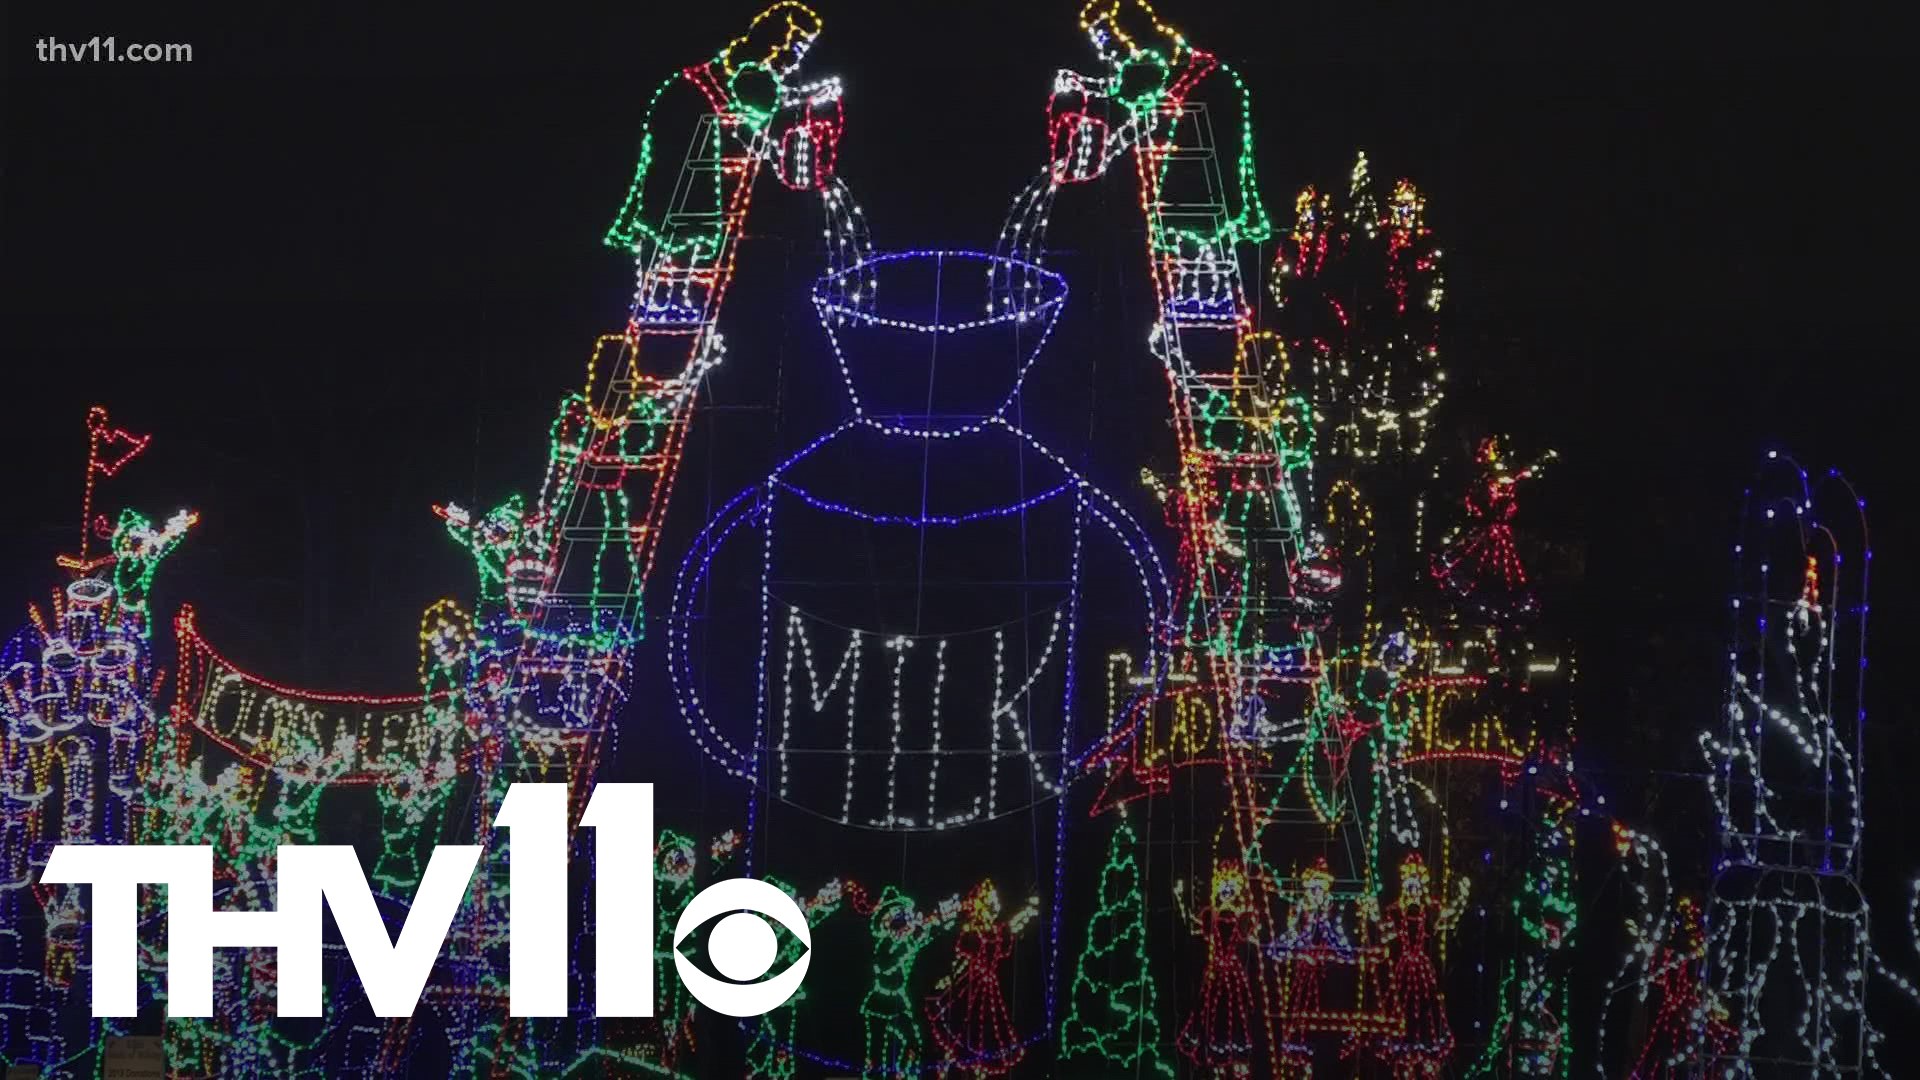 The light display is open each day from 6-9:30 PM until Dec. 30.